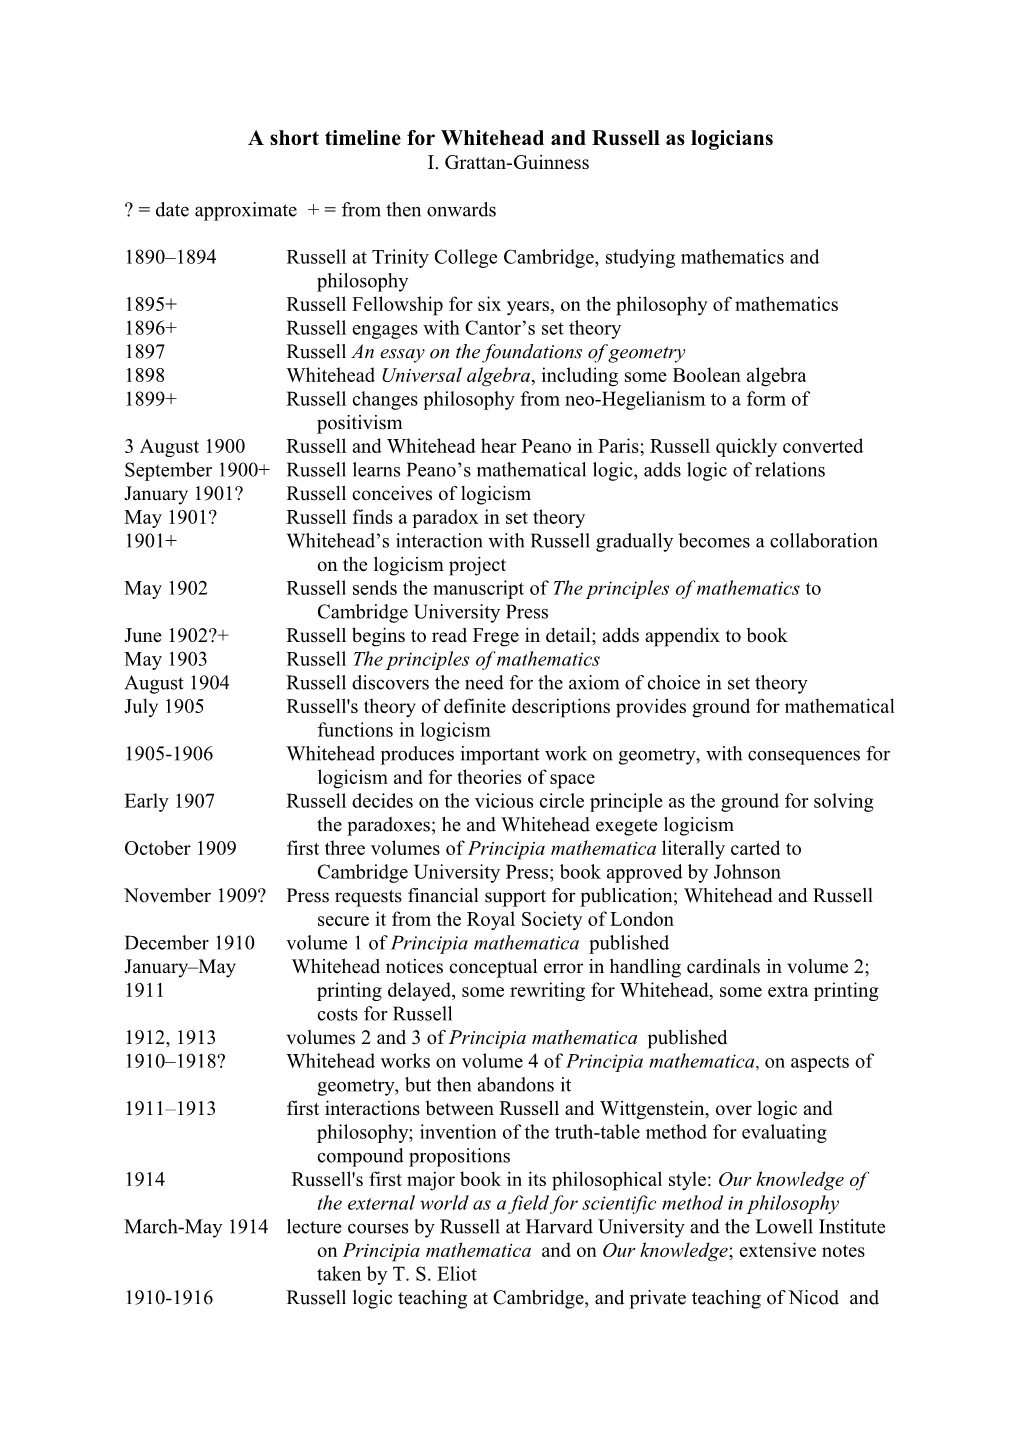 A Timeline for Whitehead and Russell As Logician's